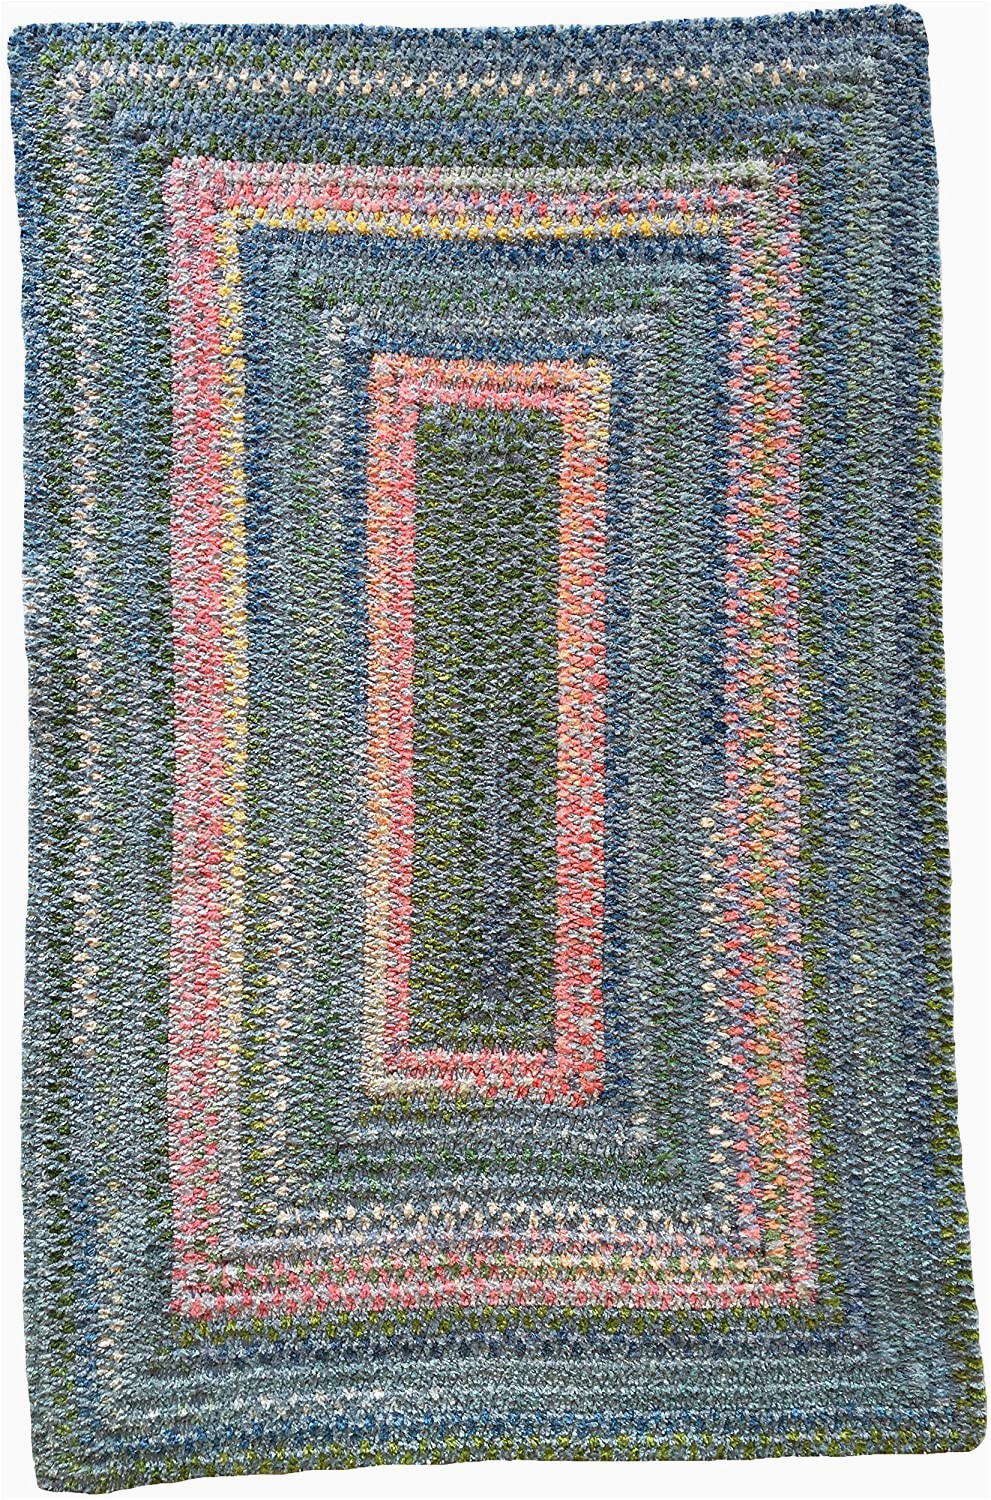 36 X 36 area Rug Amazon Capel Bailey area Rug 36" X 36" for Me Not